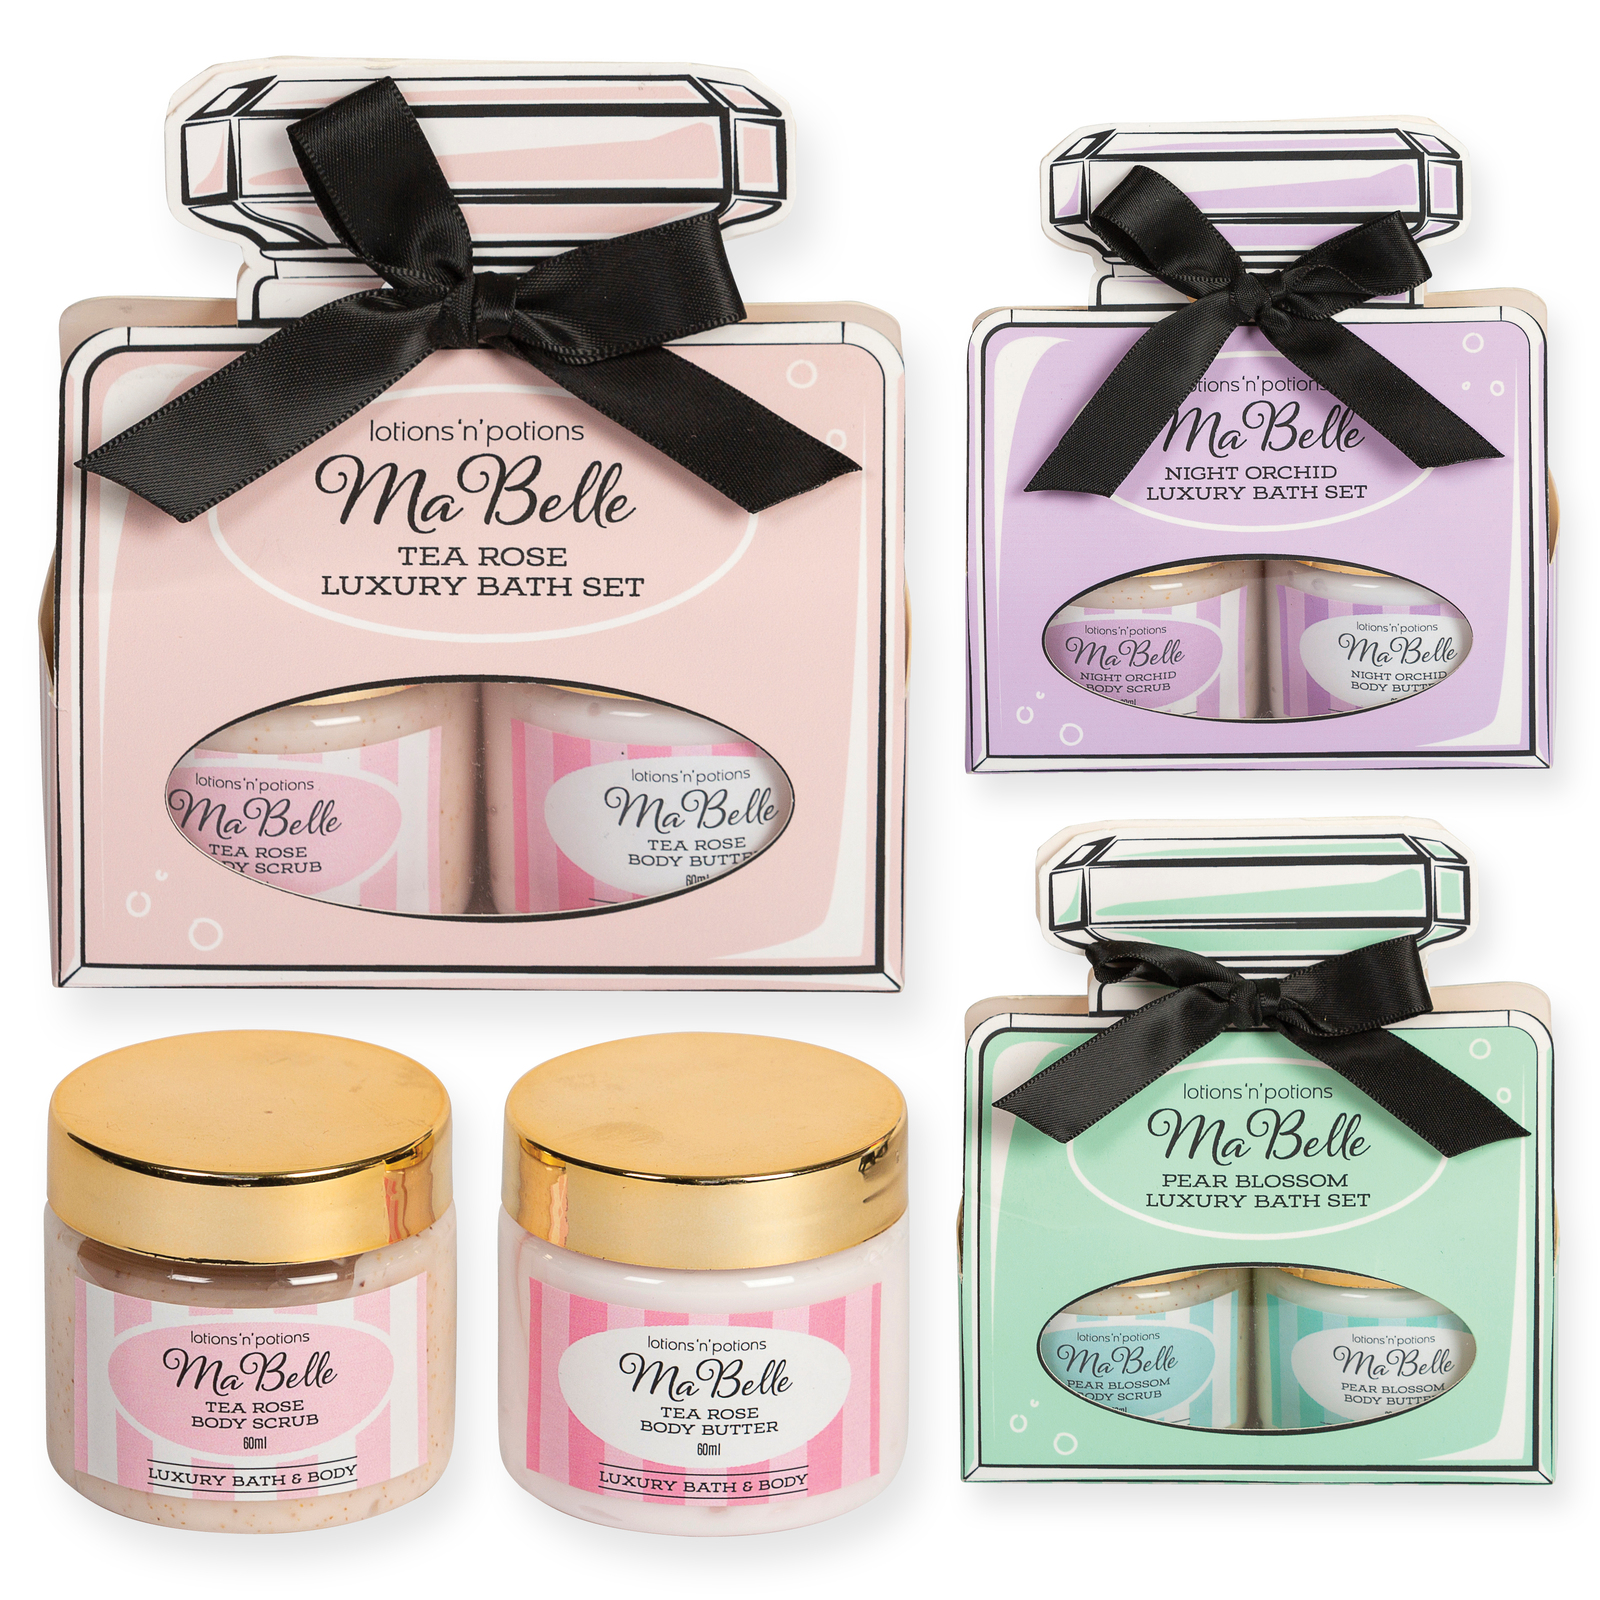 Body Butter & Body Scrub Pack - Pack of 6 ($4.40 ea)